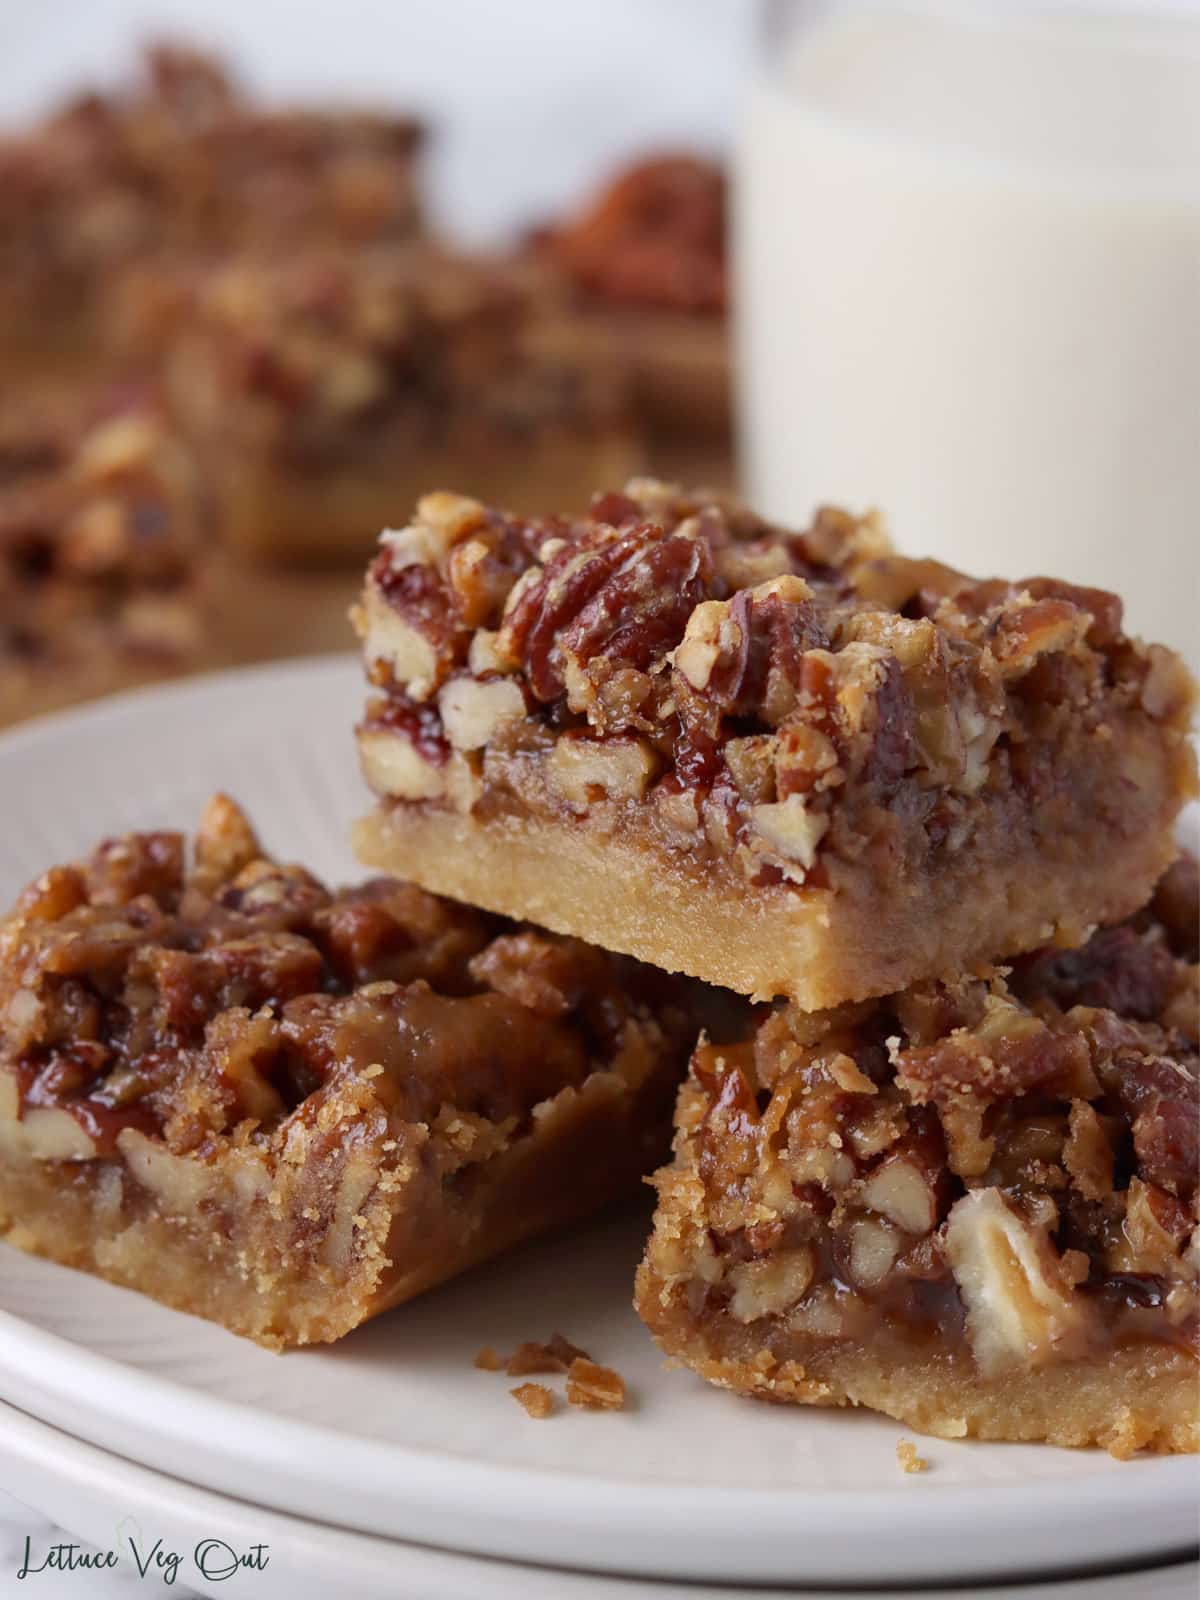 Stack of three pecan pie squares on a plate with a blurred glass of milk and board of more squares in back.